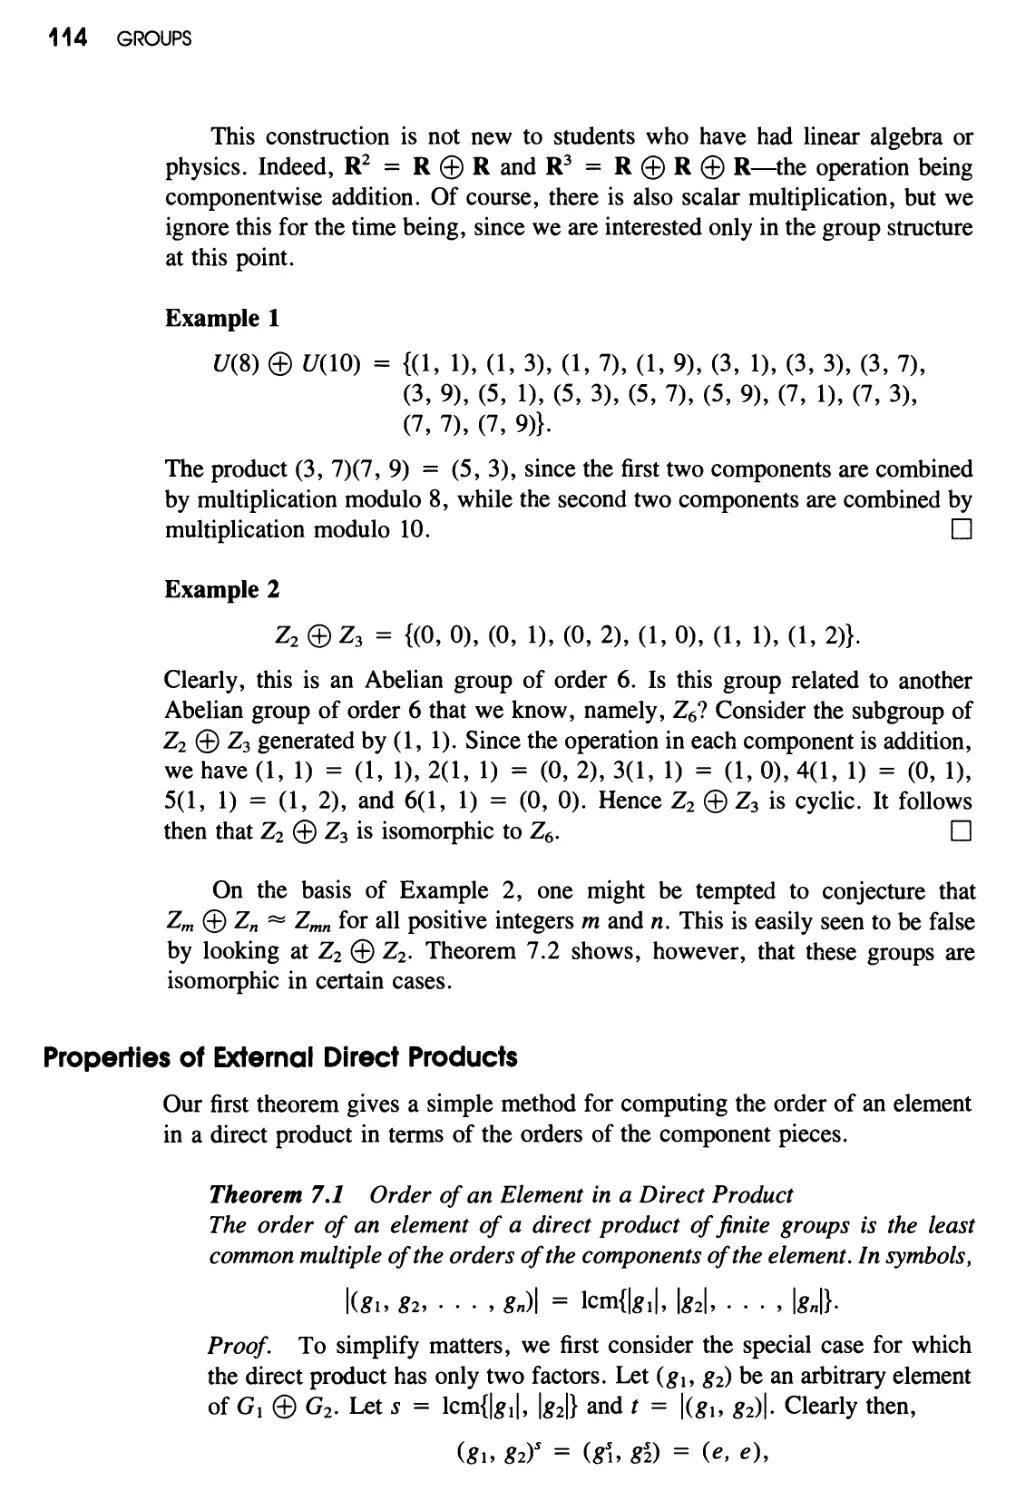 Properties of External Direct Products